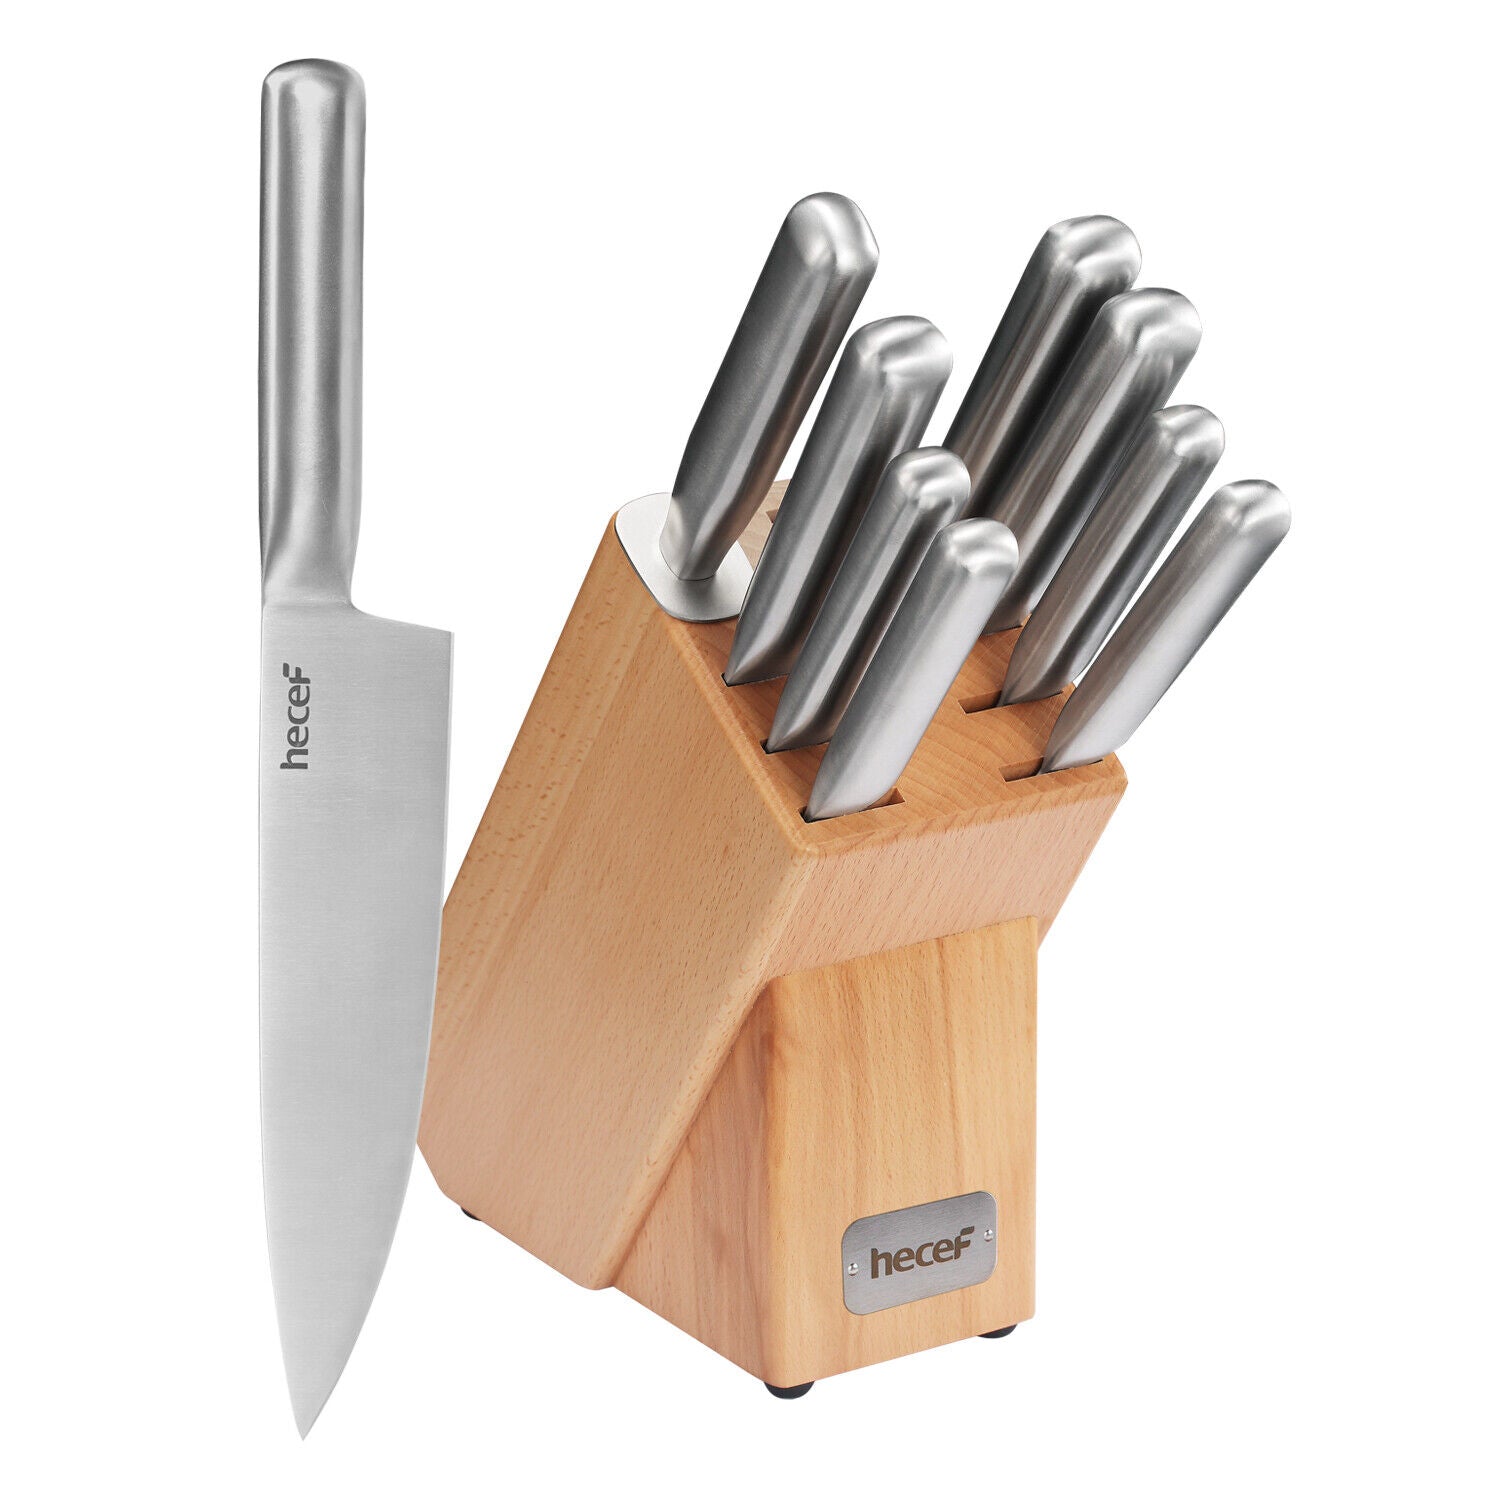  hecef Knife Set, 15 Pieces Knives Set for Kitchen with Wooden  Block, Stainless Steel Blade with Patented Handle, Damascus Style Kitchen Knife  Set with Steak Knives, Scissors, Sharpening Steel & Block